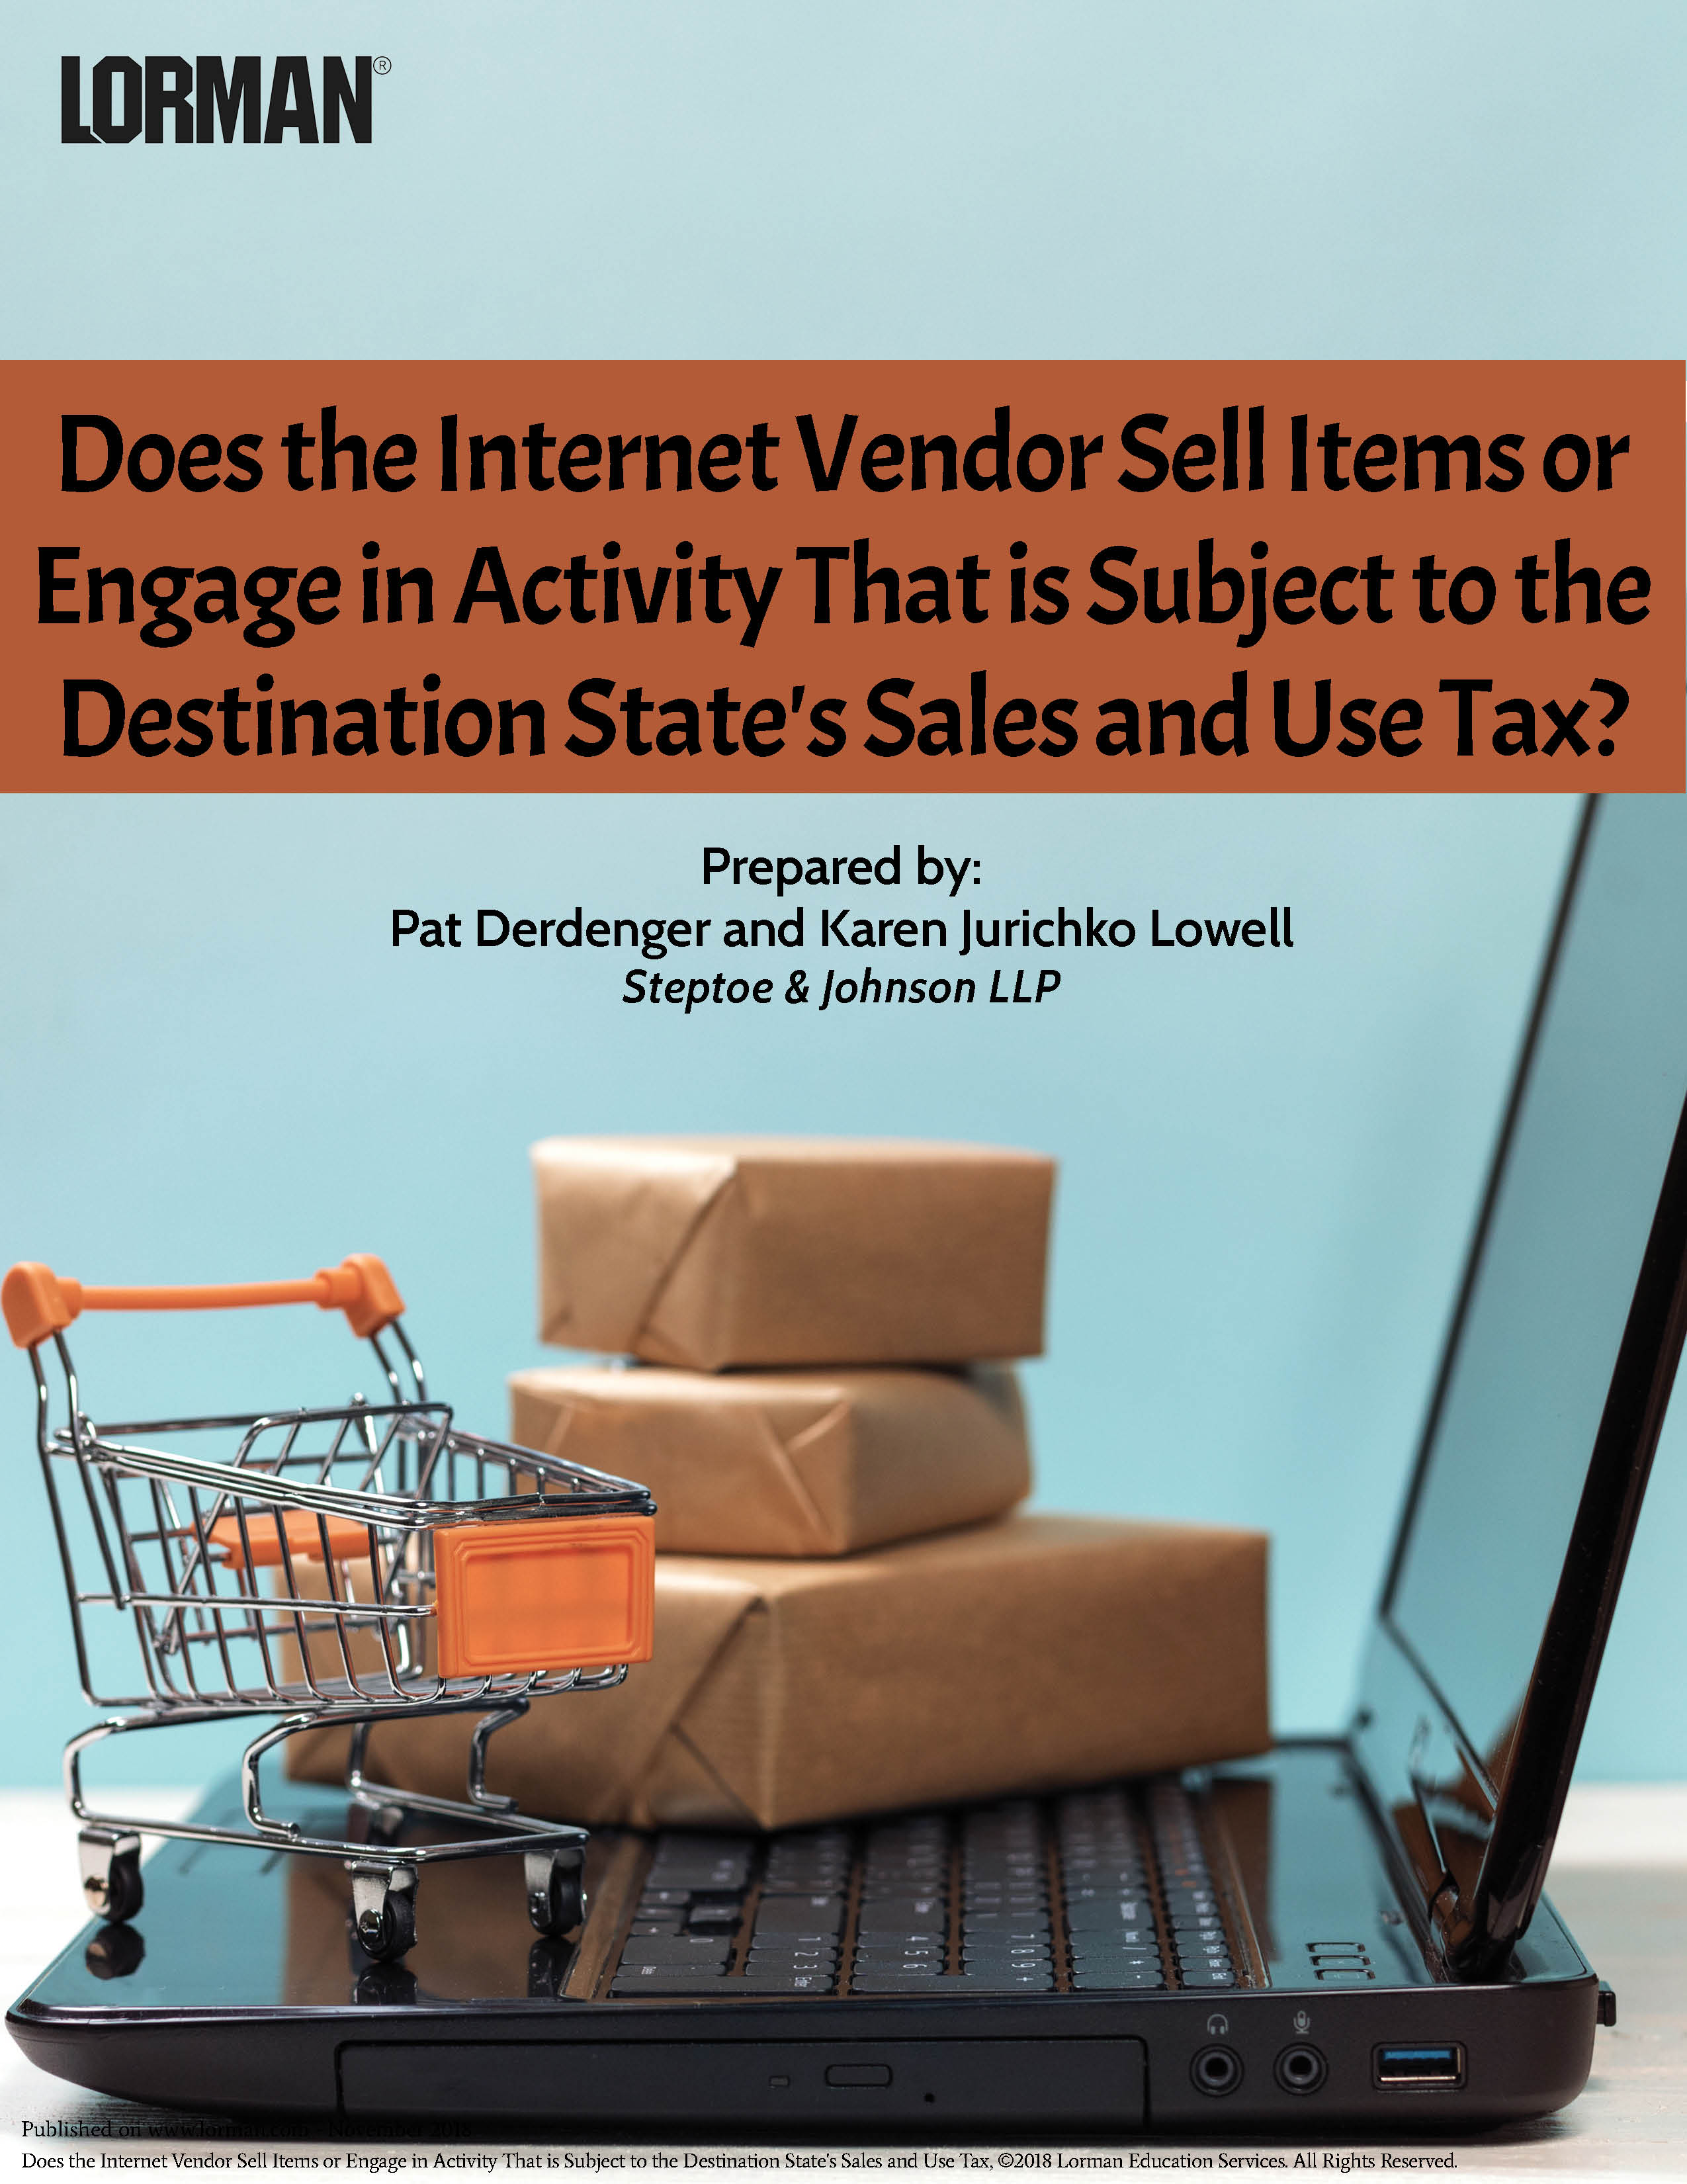 Does the Internet Vendor Sell Items Subject to Destination State's Sales and Use Tax?